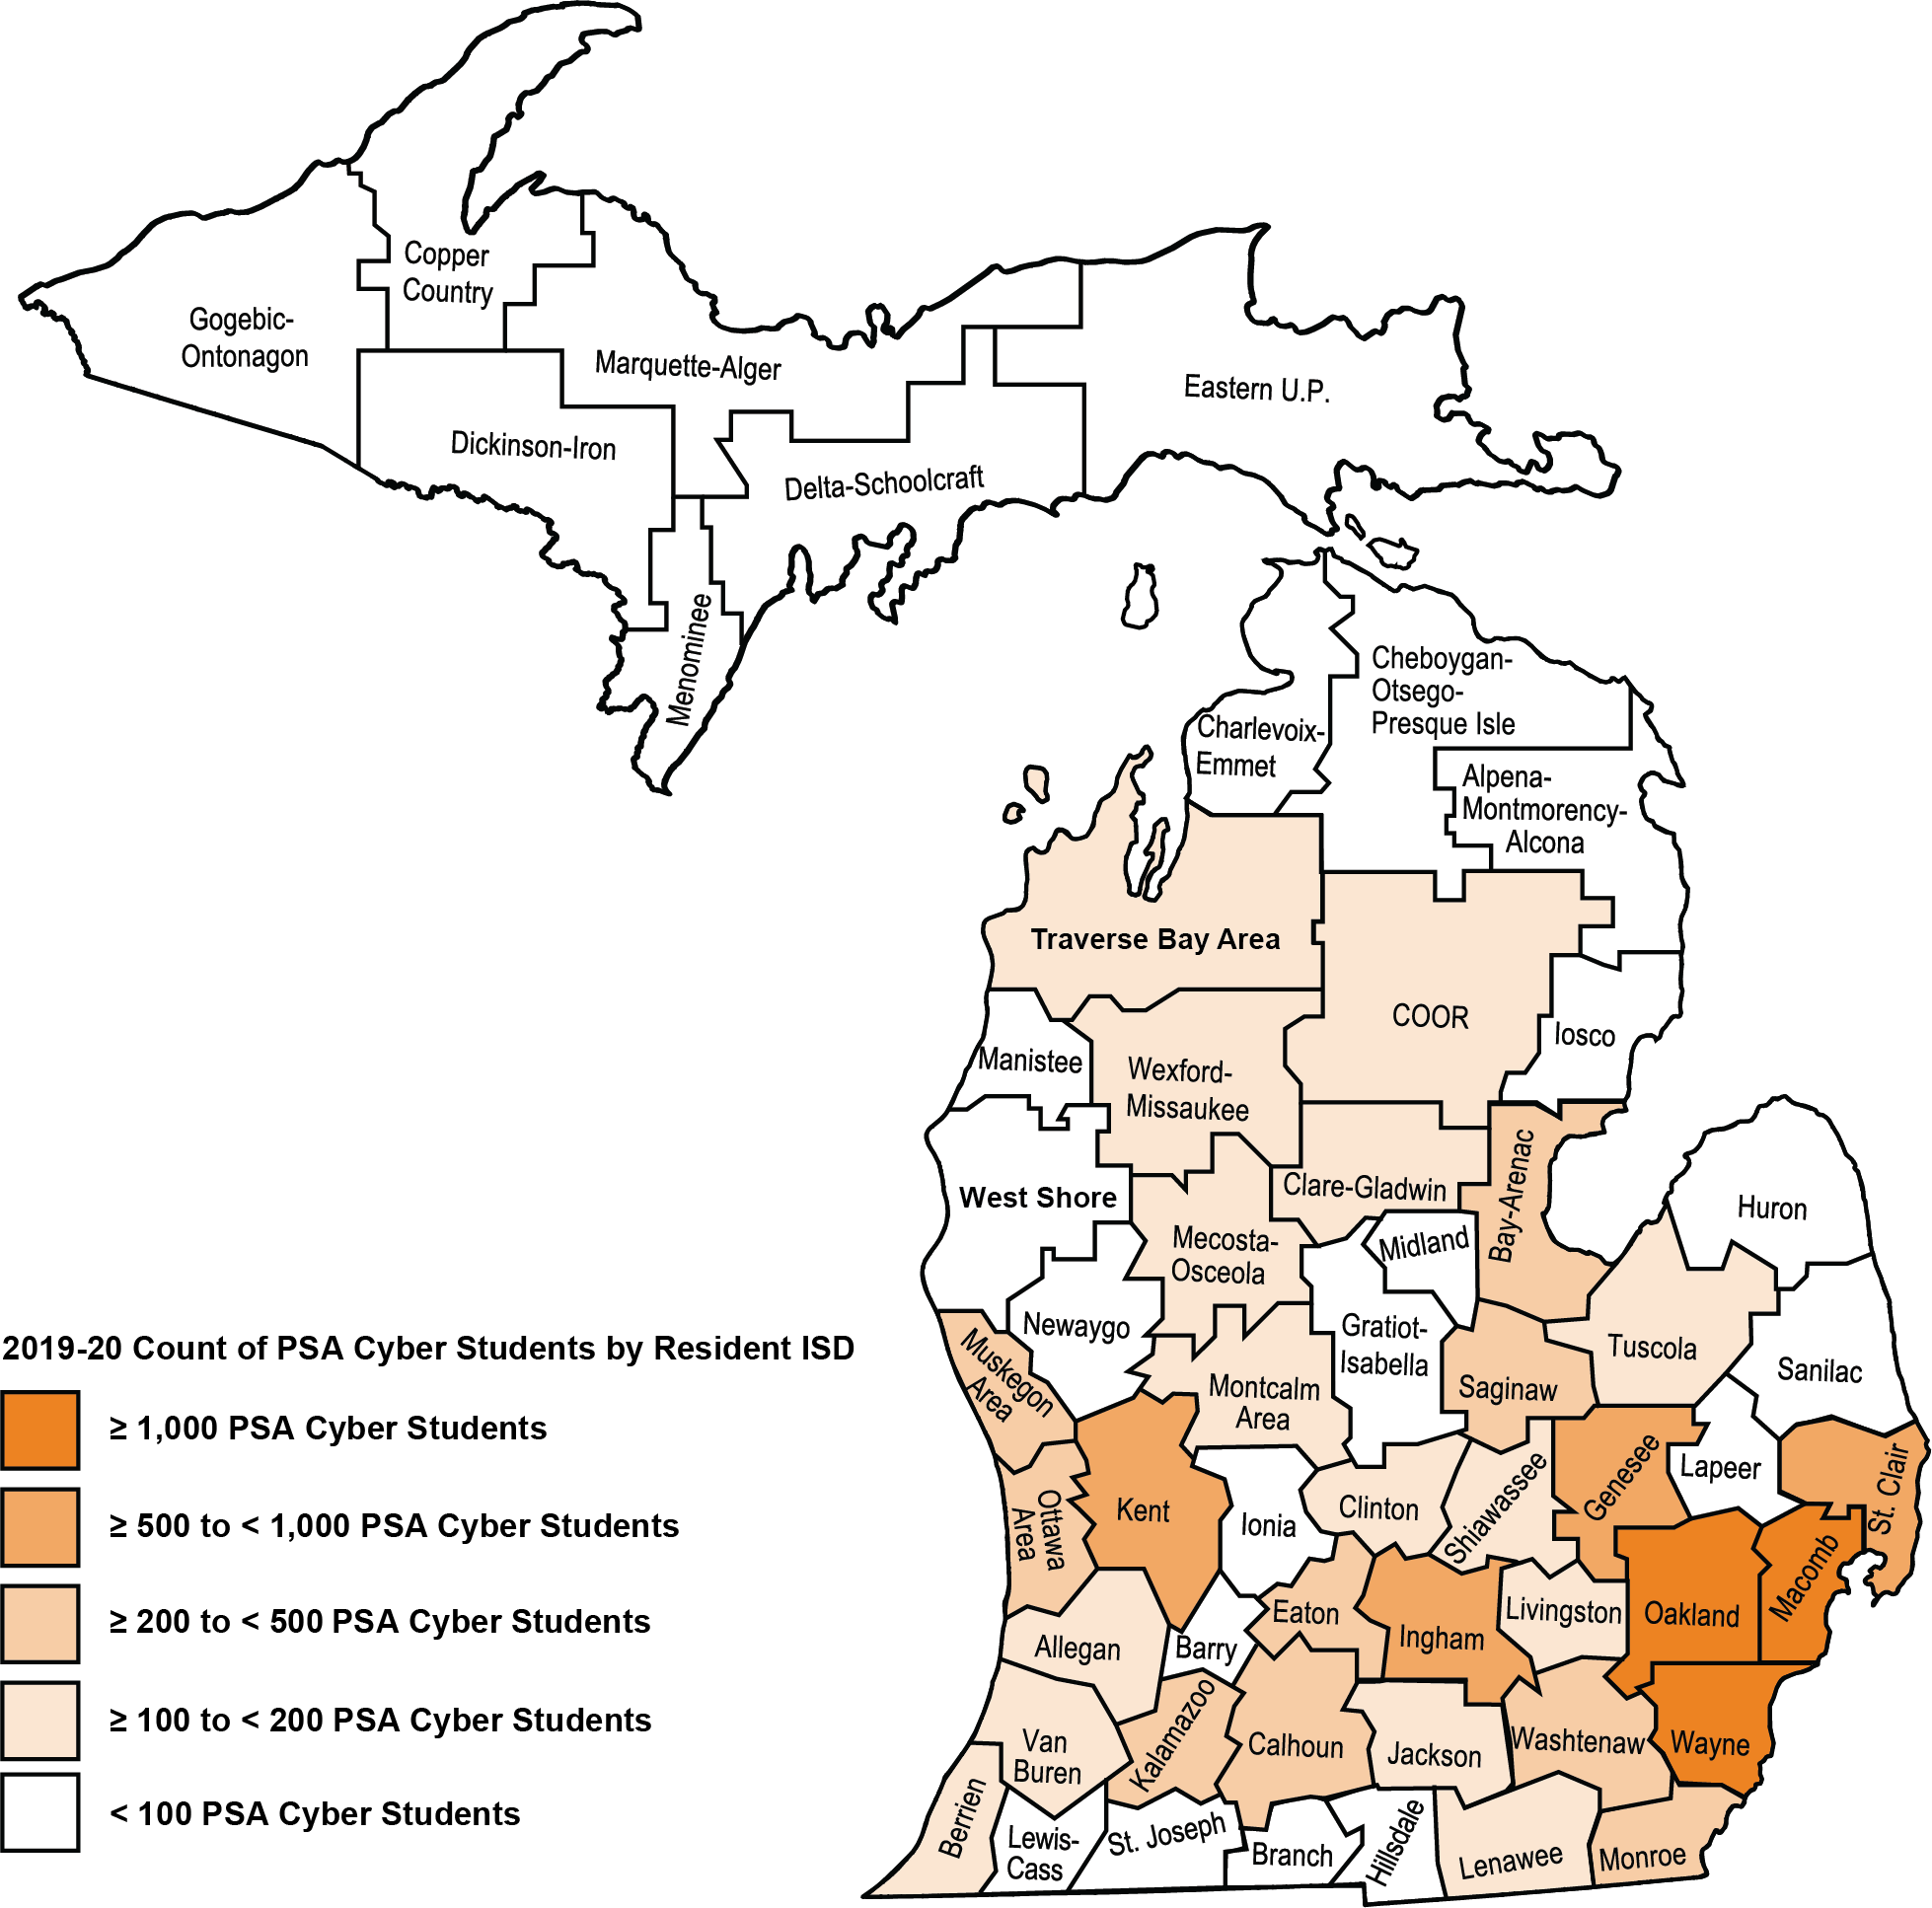 Map shows Michigan ISDs colored by the percentage of PSA cyber students by resident ISD. The majority of counties are white meaning they have less than 100 PSA cyber students in 2019-20. Counties with the highest percentage cluster around the Wayne, Oakland, Macomb, Ingham, and Kent counties.